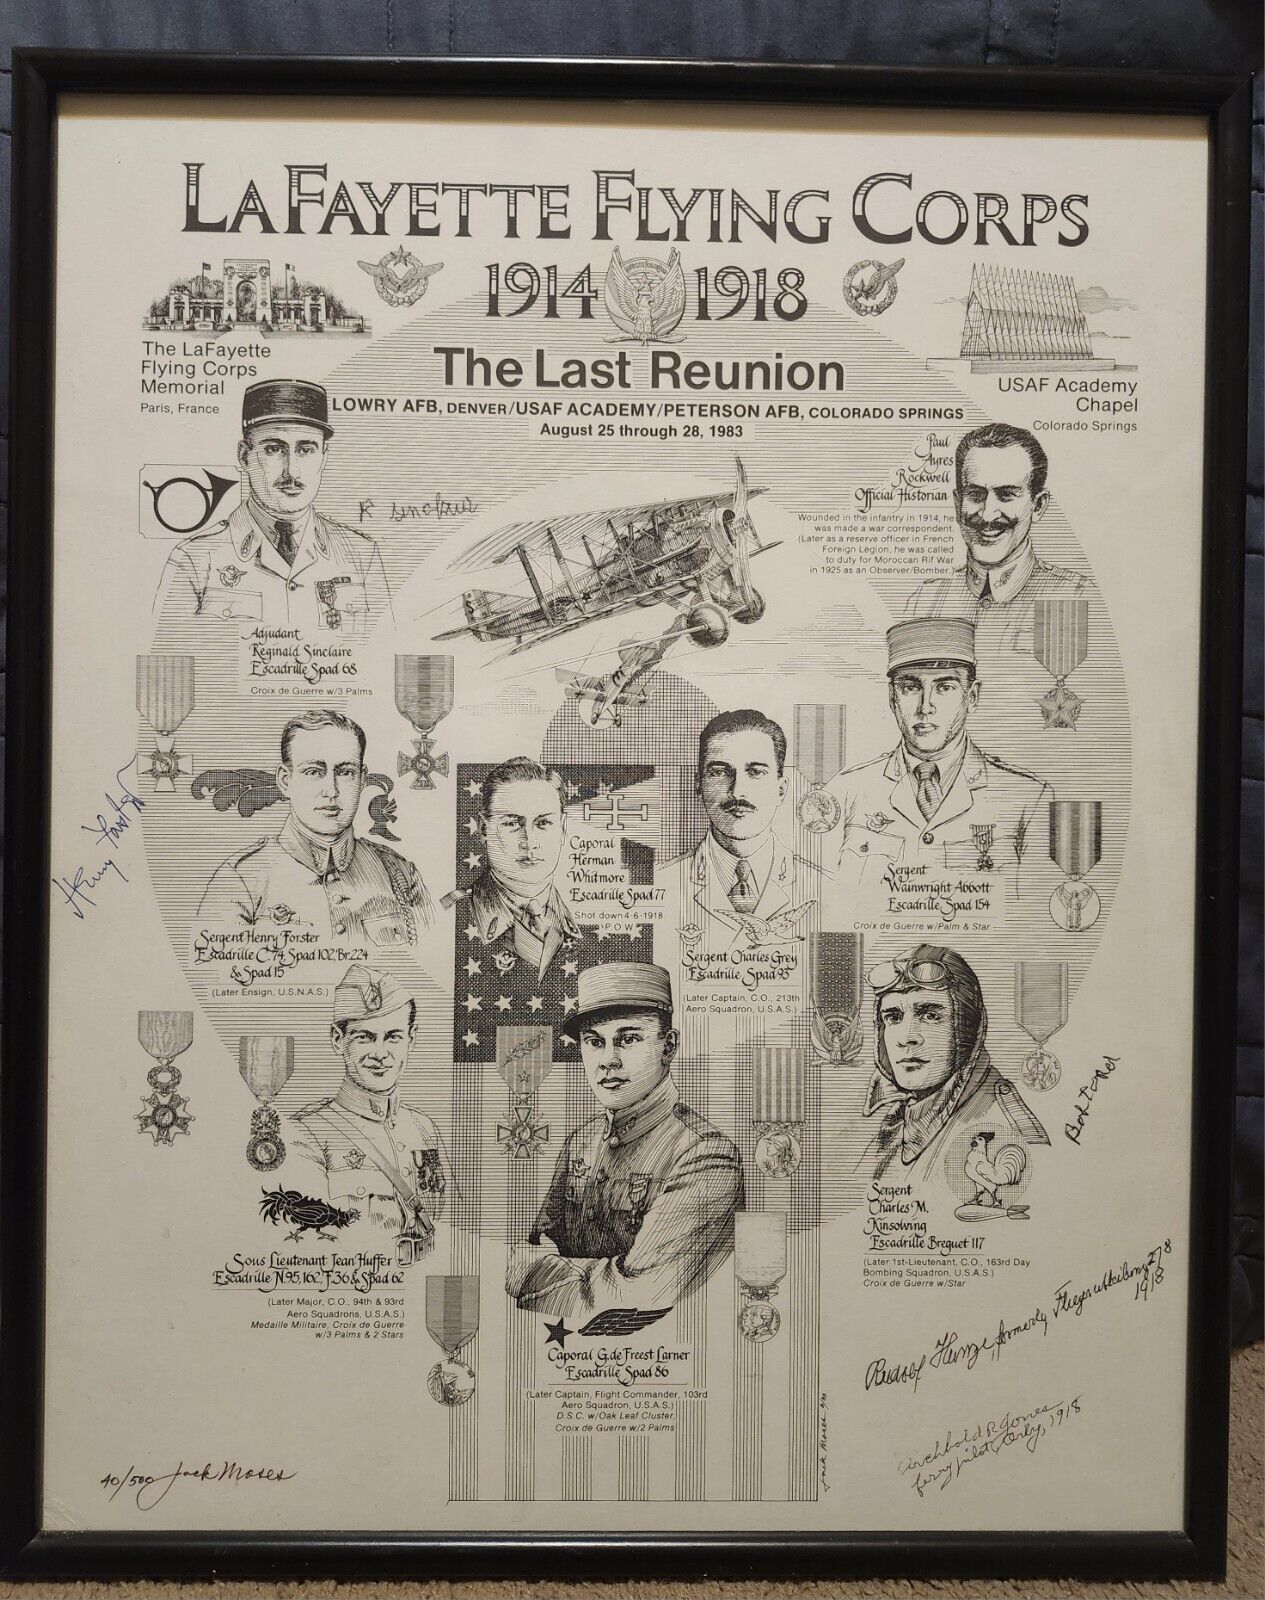 LAFAYETTE FLYING CORPS 1914-1918 THE LAST REUNION POSTER SIGNED